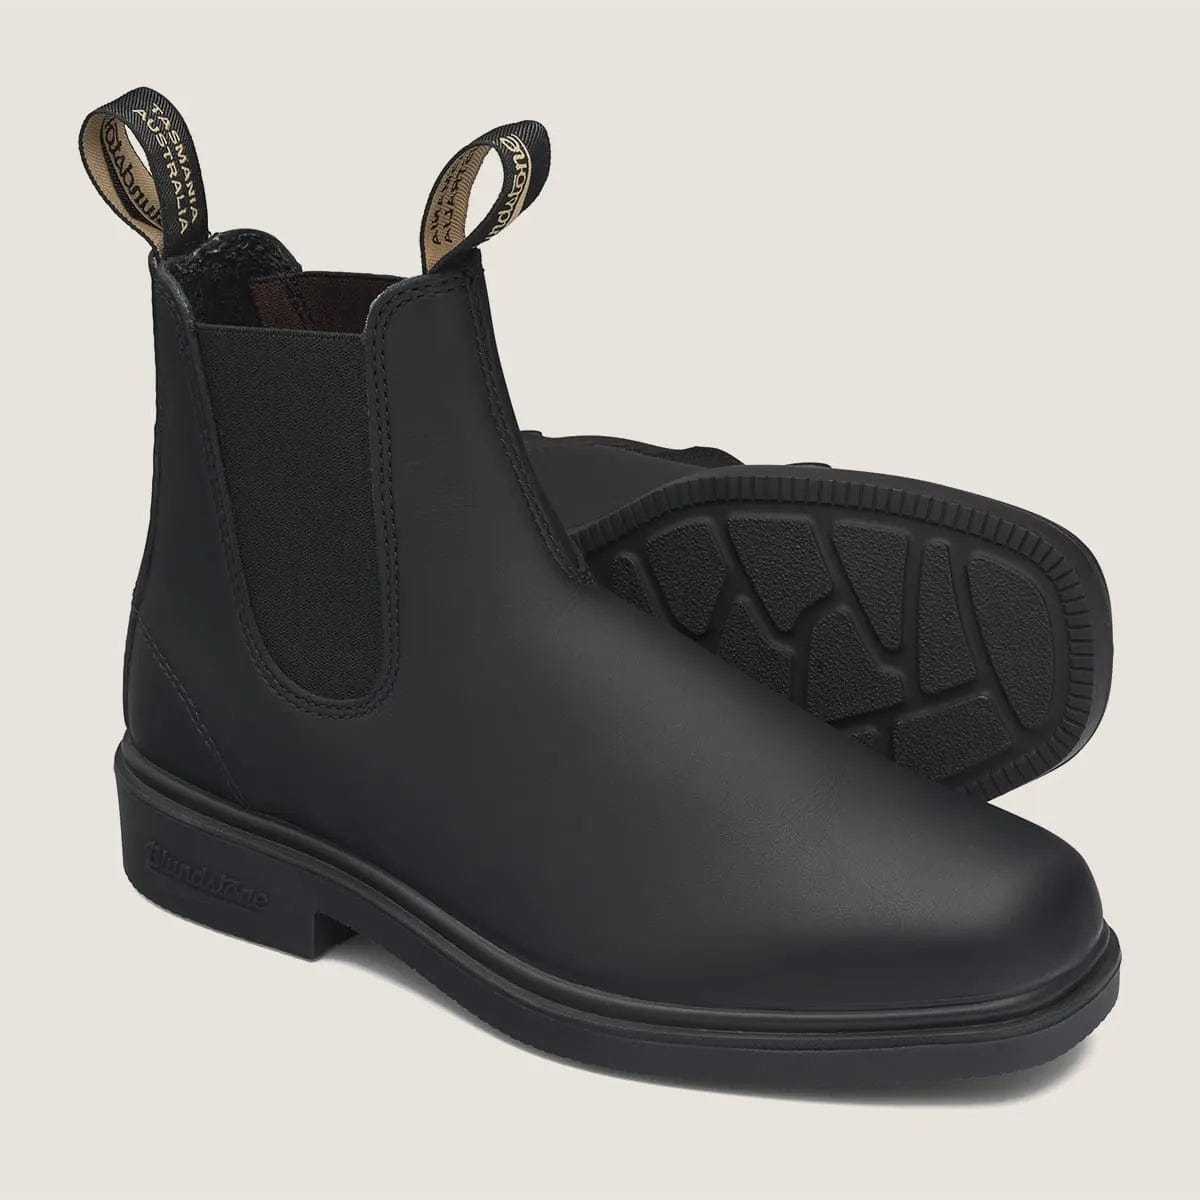 Blundstone BOOTS #063 Elastic Sided Dress Boot - Black